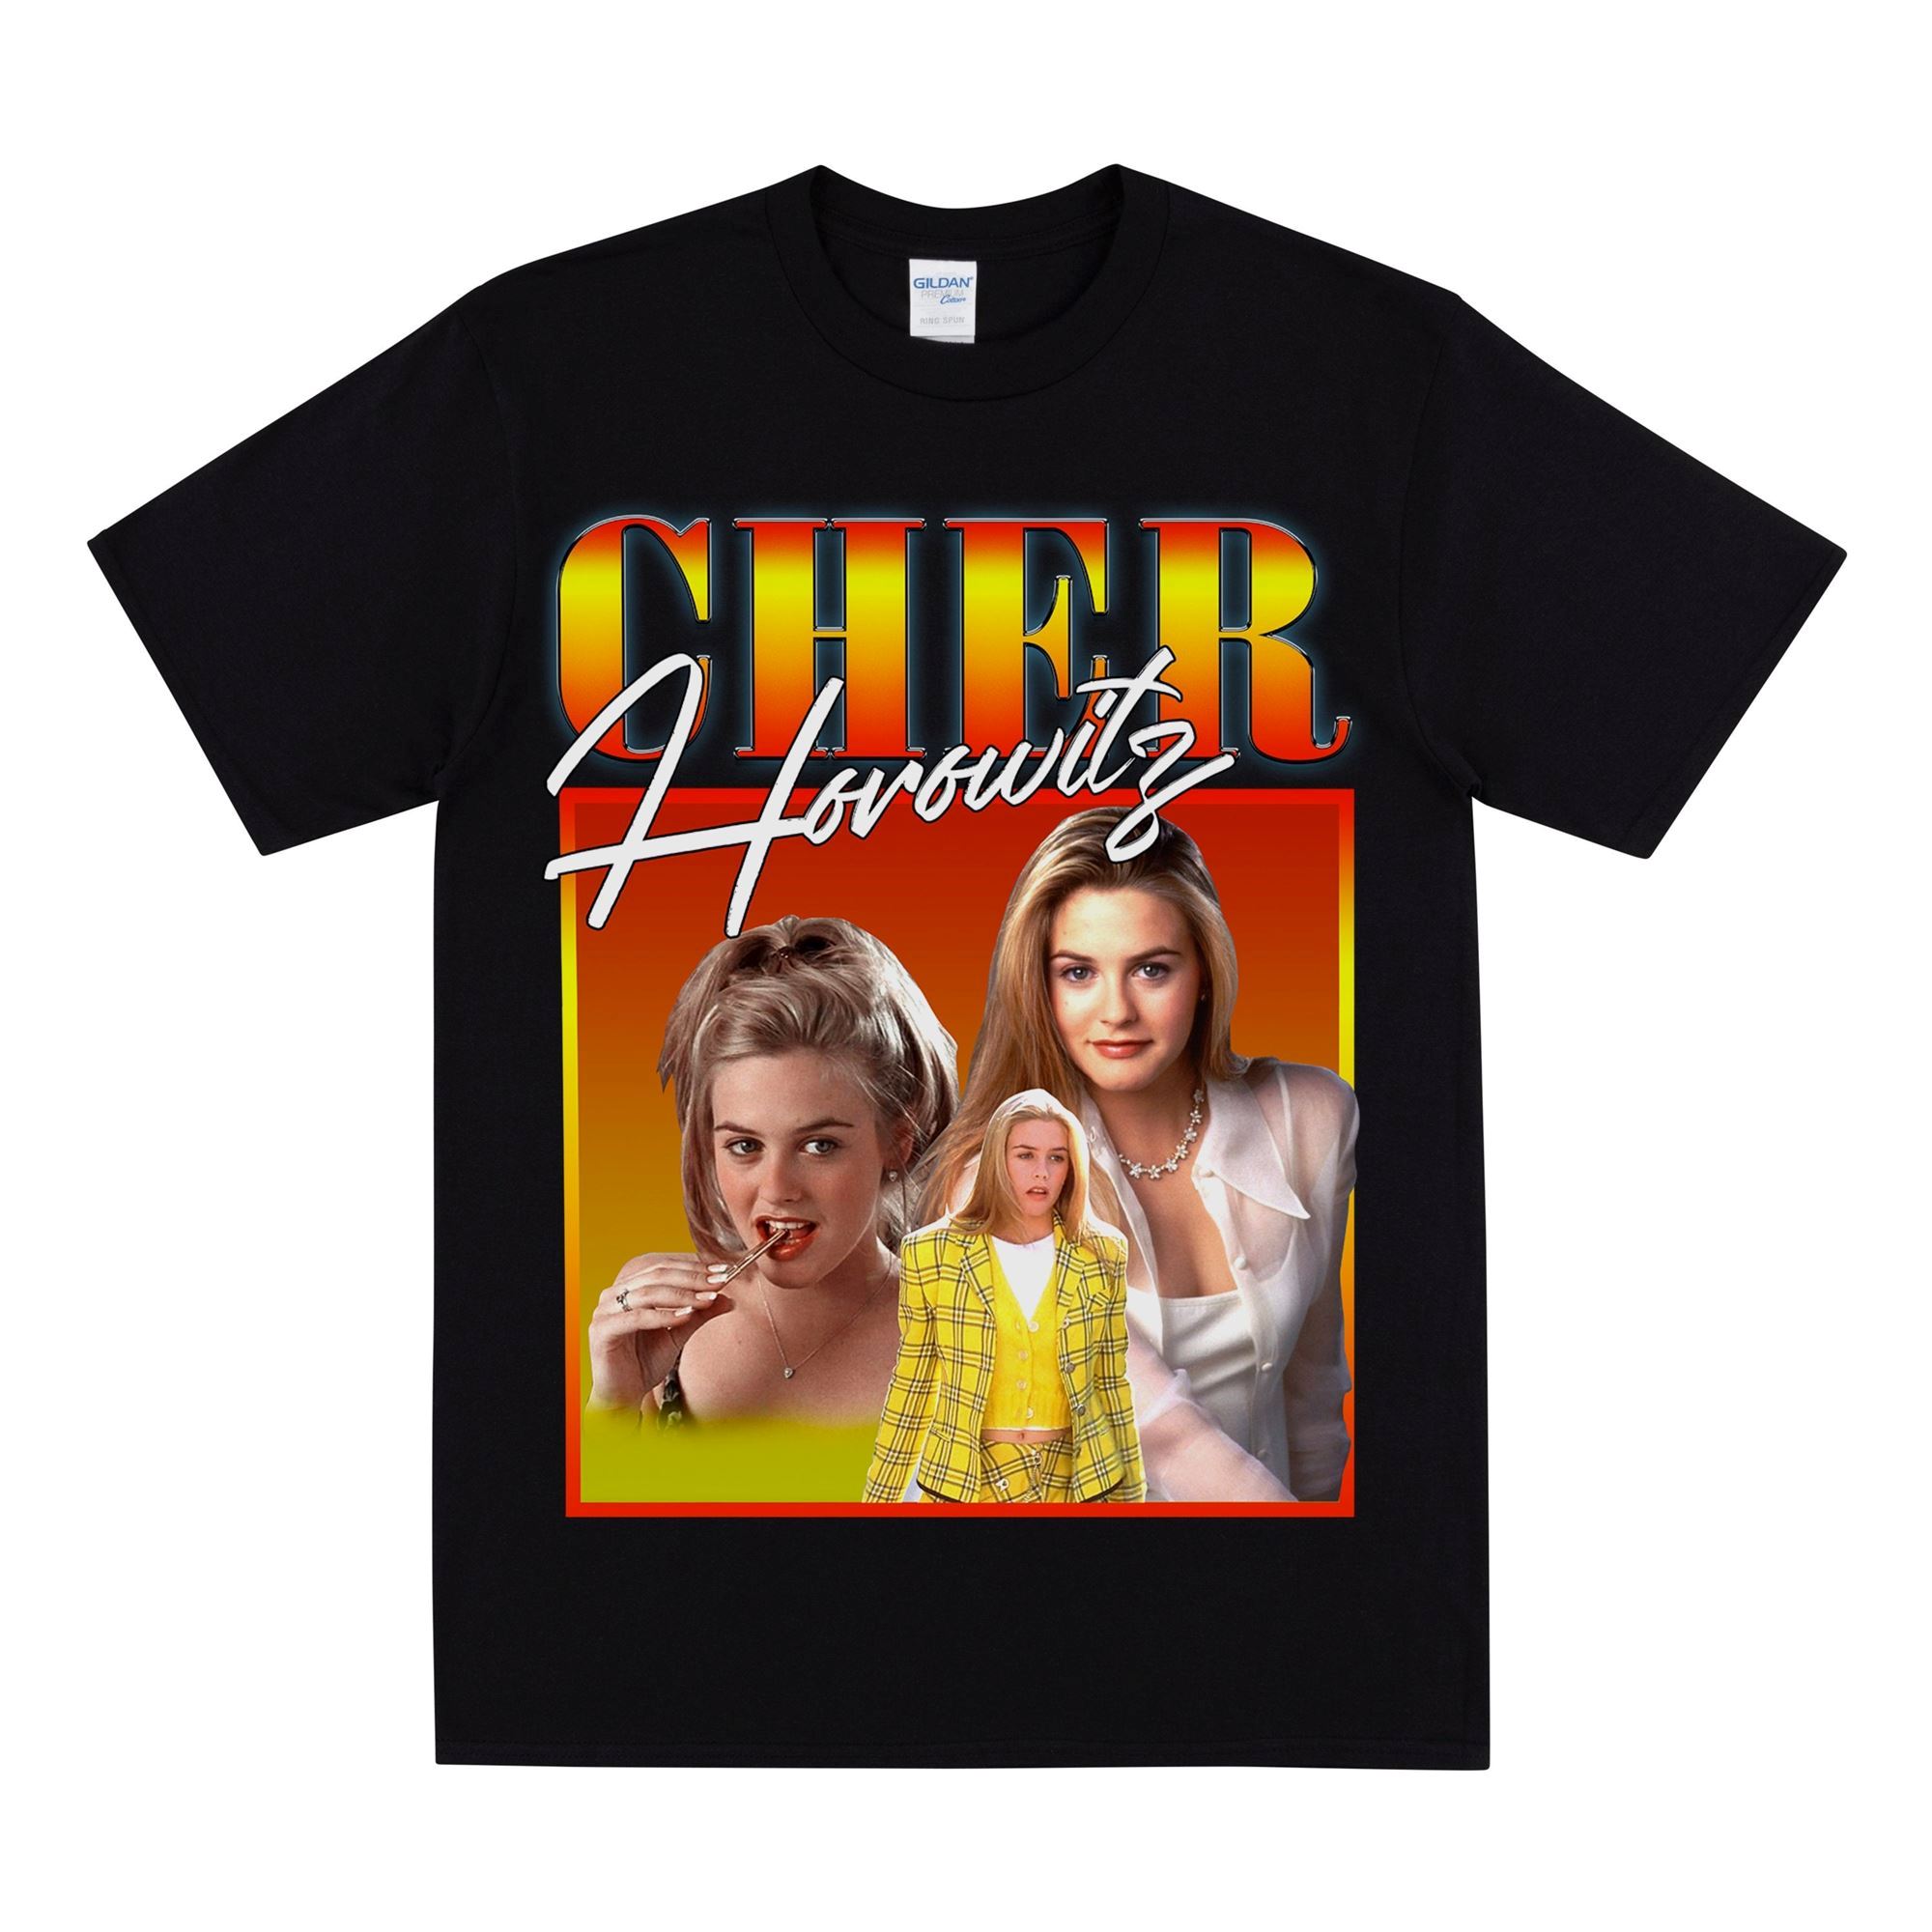 Special Cher Horowitz From Clueless T-shirt For Women Classic High School Film Inspired T Shirt Retro 90s Movie Baggy Boho Hippy Tee Unisex 